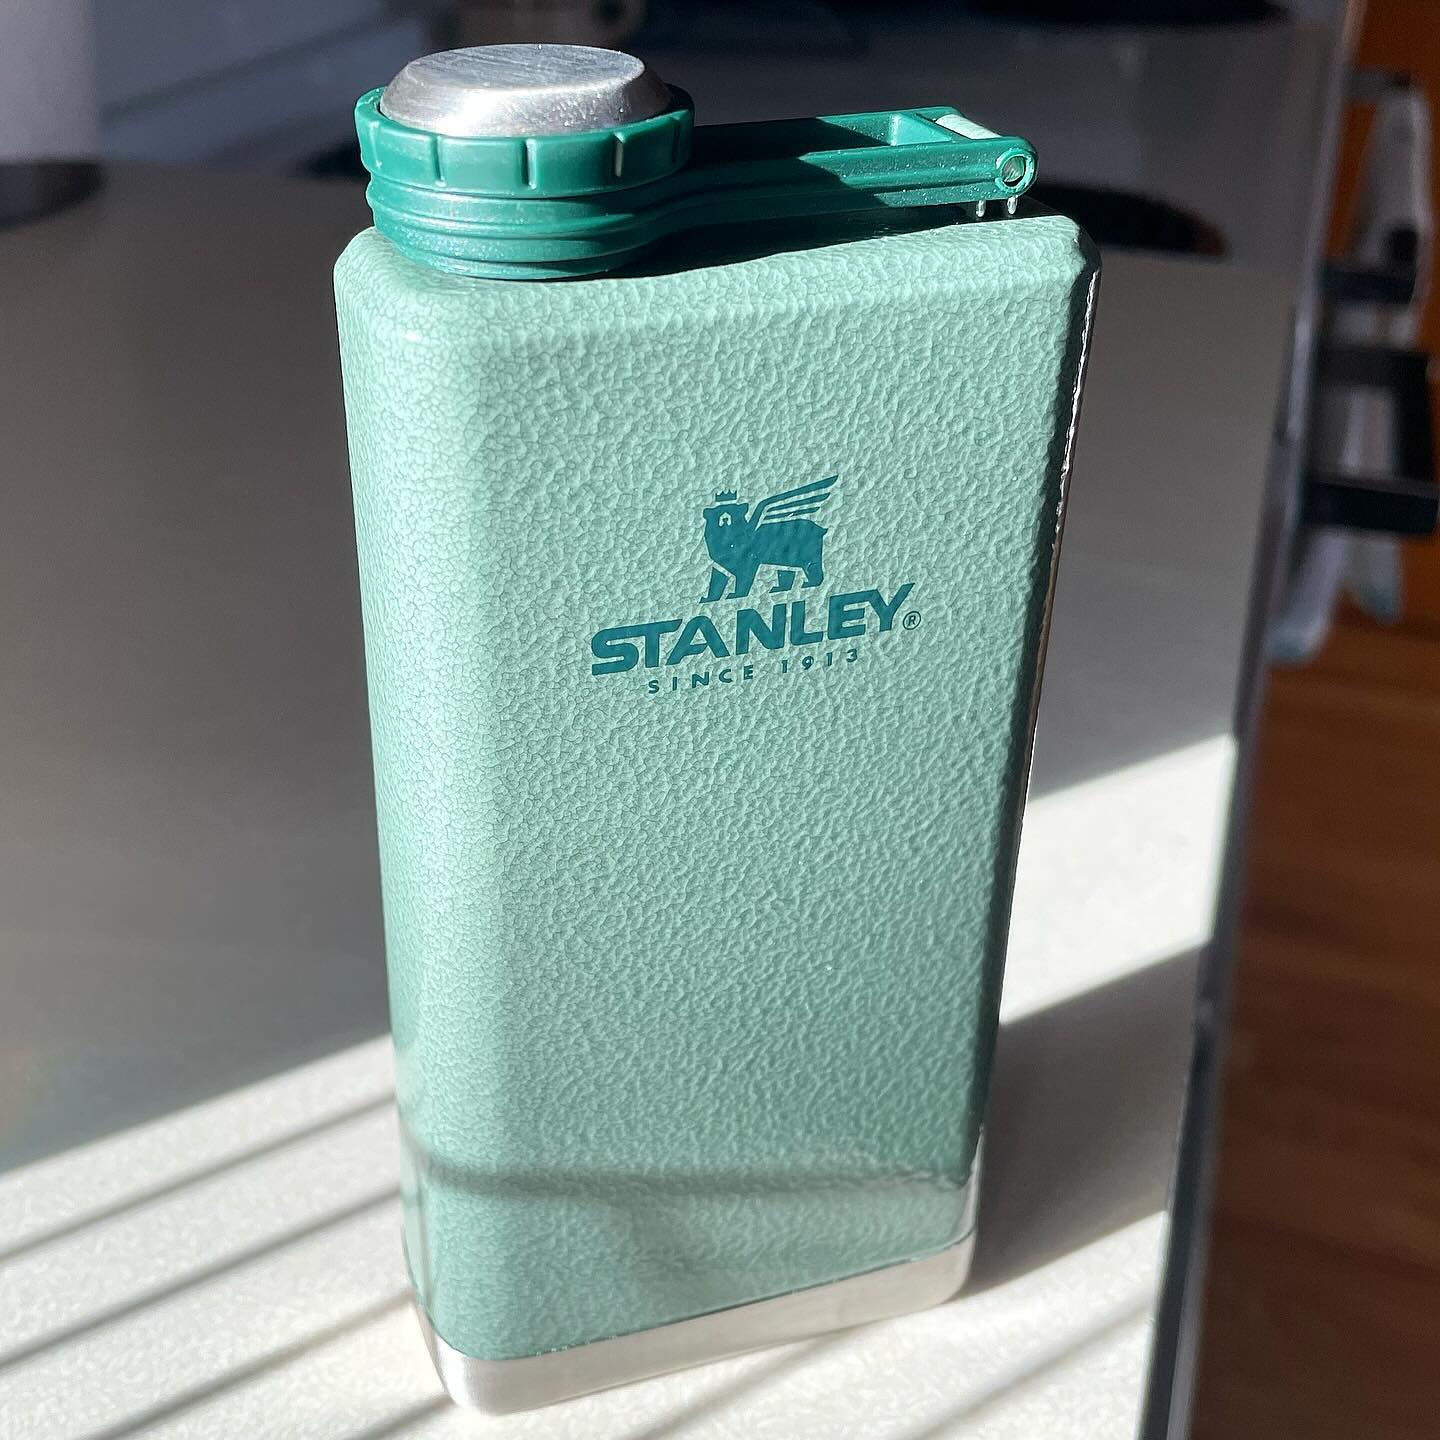 I’ve joined the Stanley craze. 

(For the record, this was on my wish list for years)